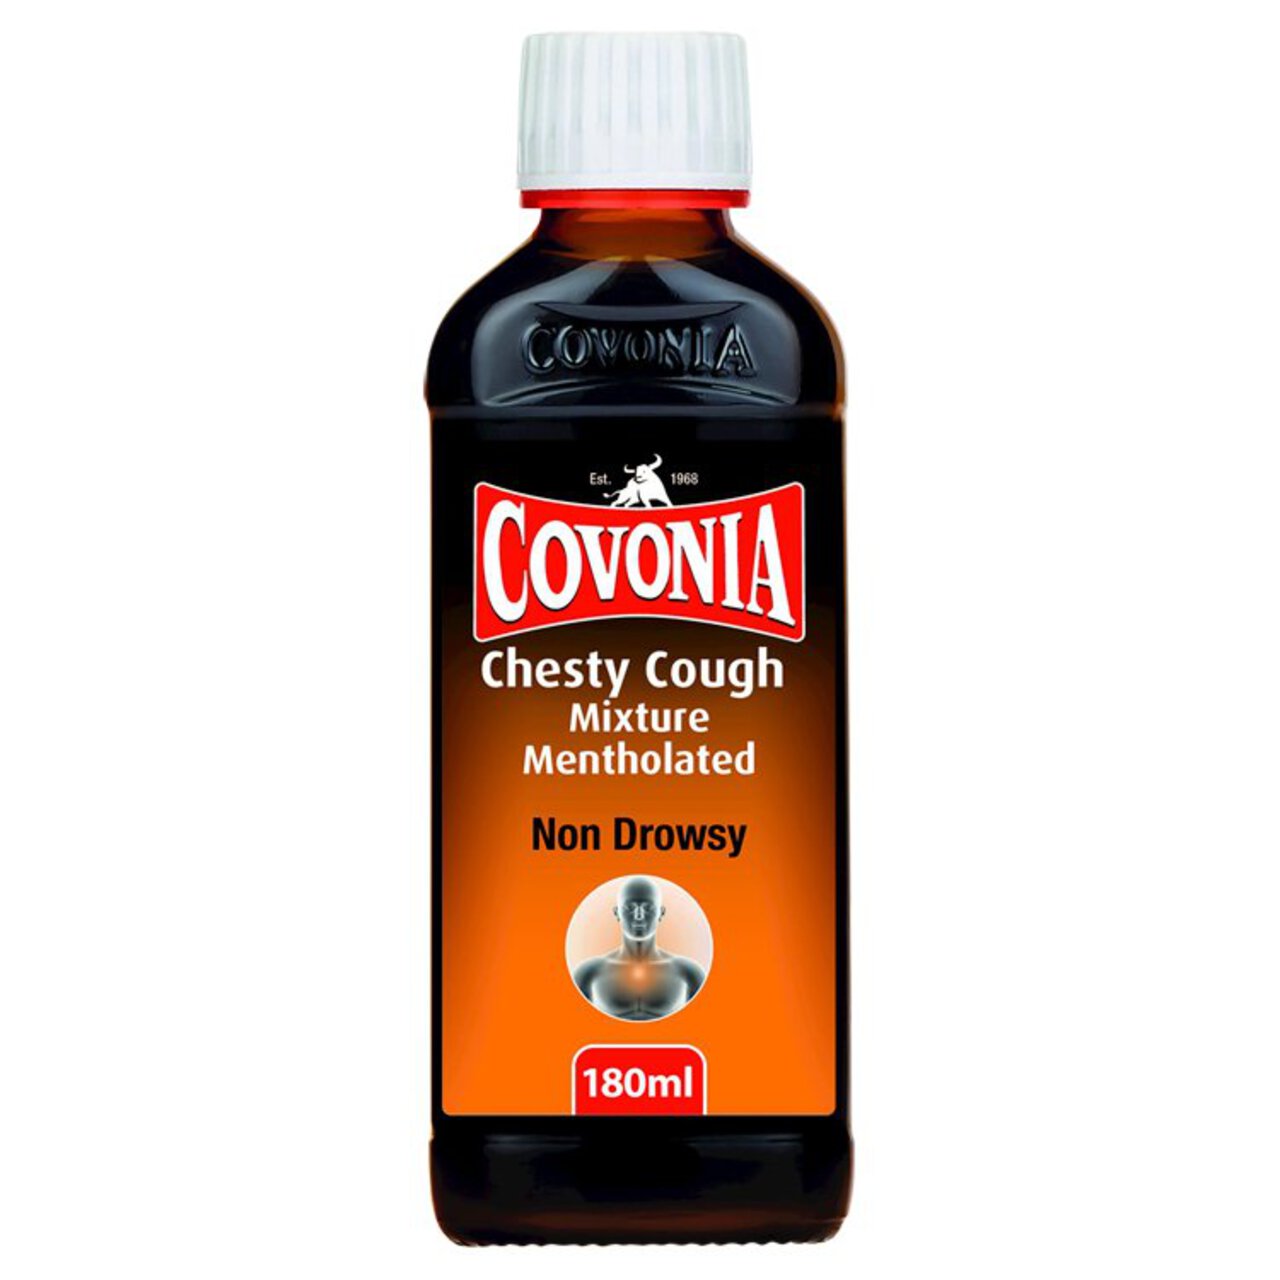 Covonia Chesty Cough Mixture 180ml